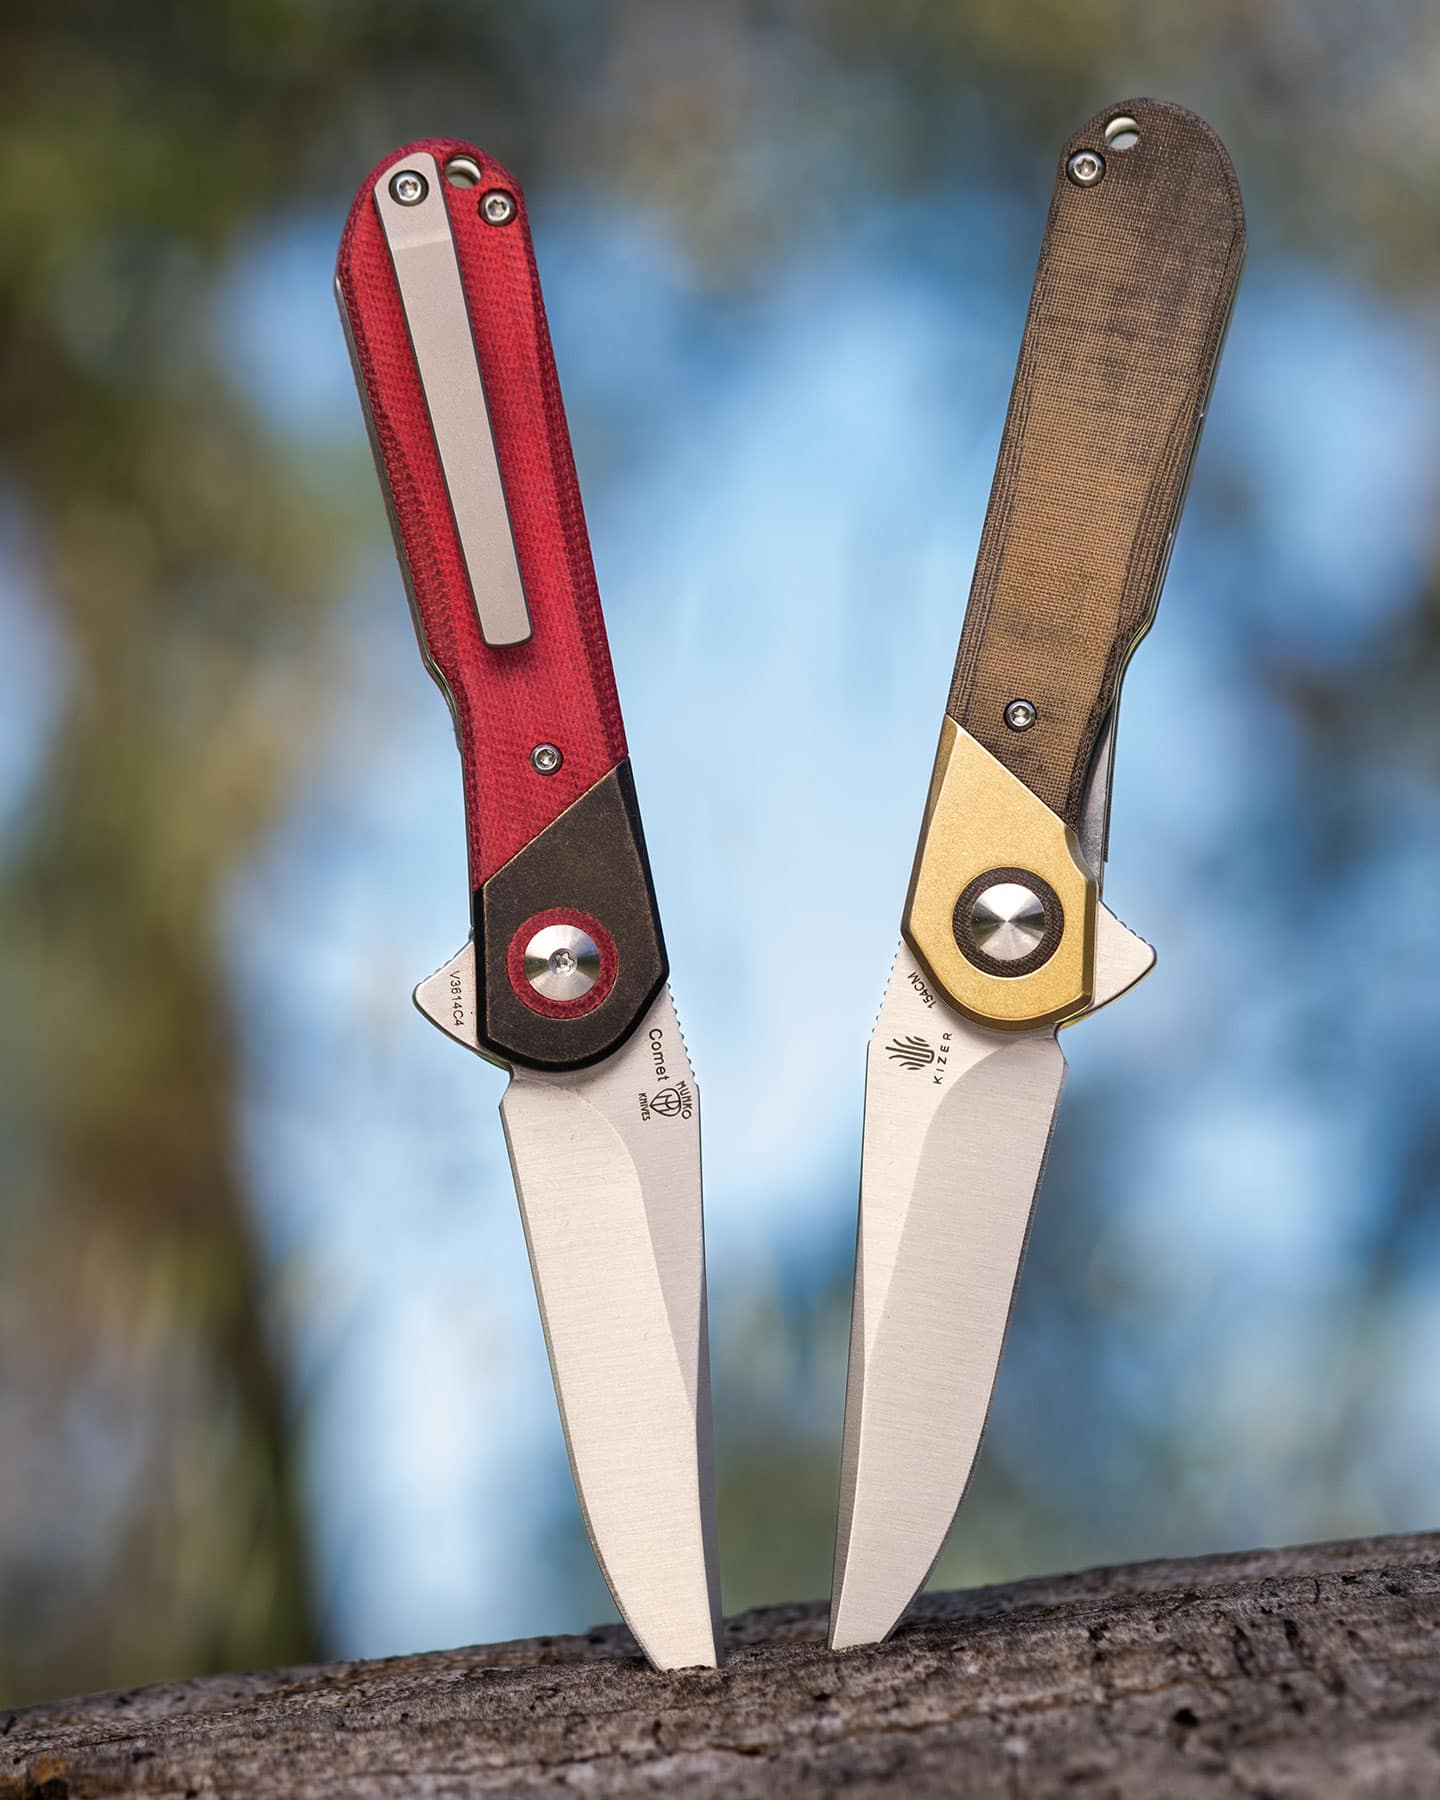 The Nothing But Knives hands on review of the Kizer Comet pocket knife.